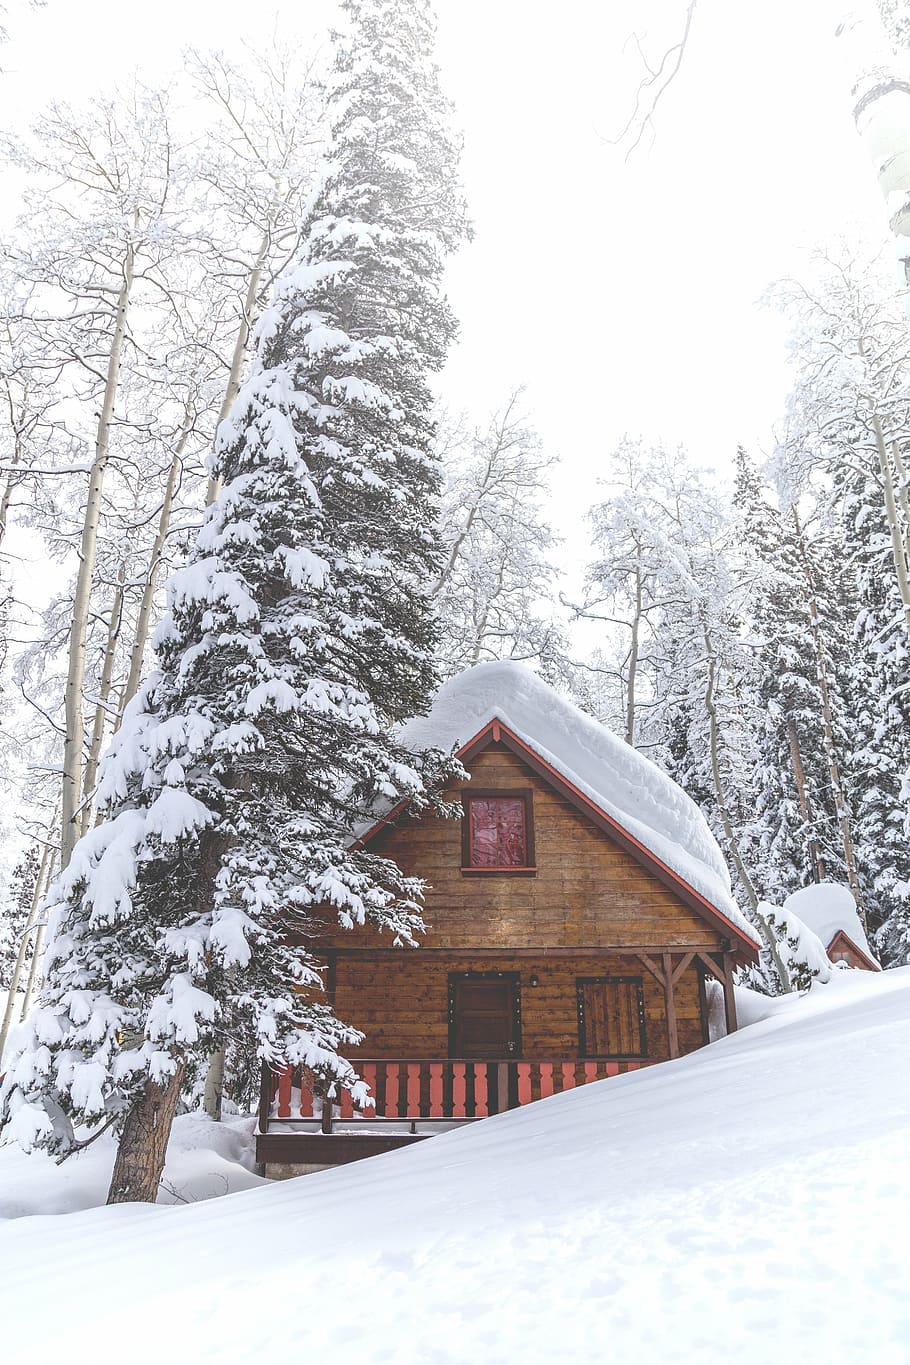 brown and red house surrounded by high trees covered by snow under white sky at daytime